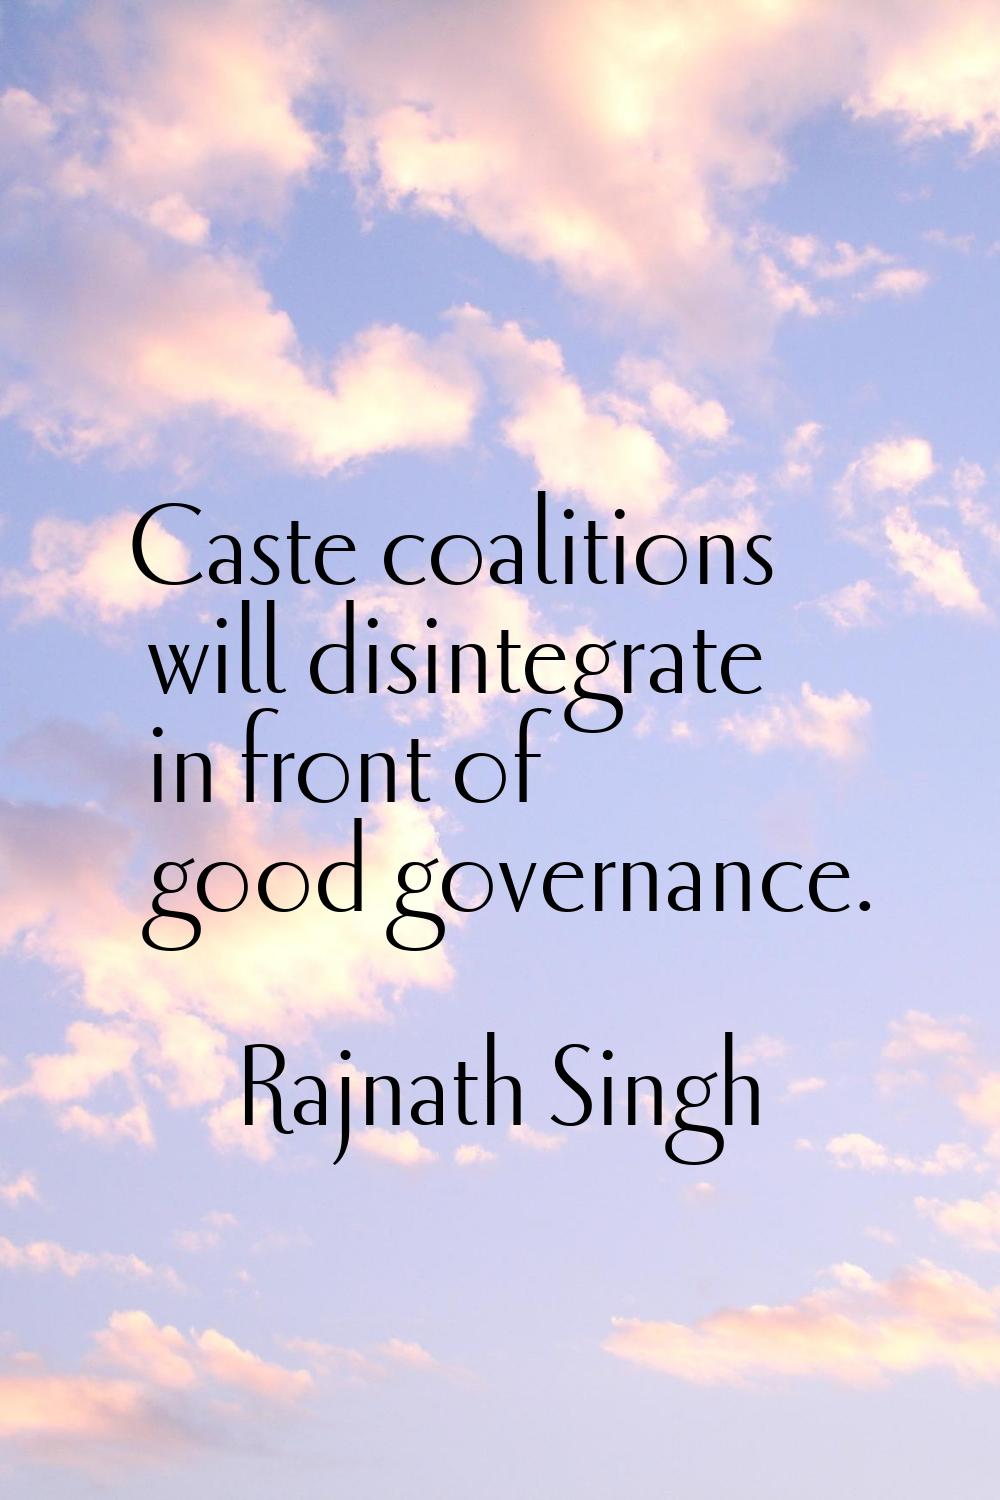 Caste coalitions will disintegrate in front of good governance.